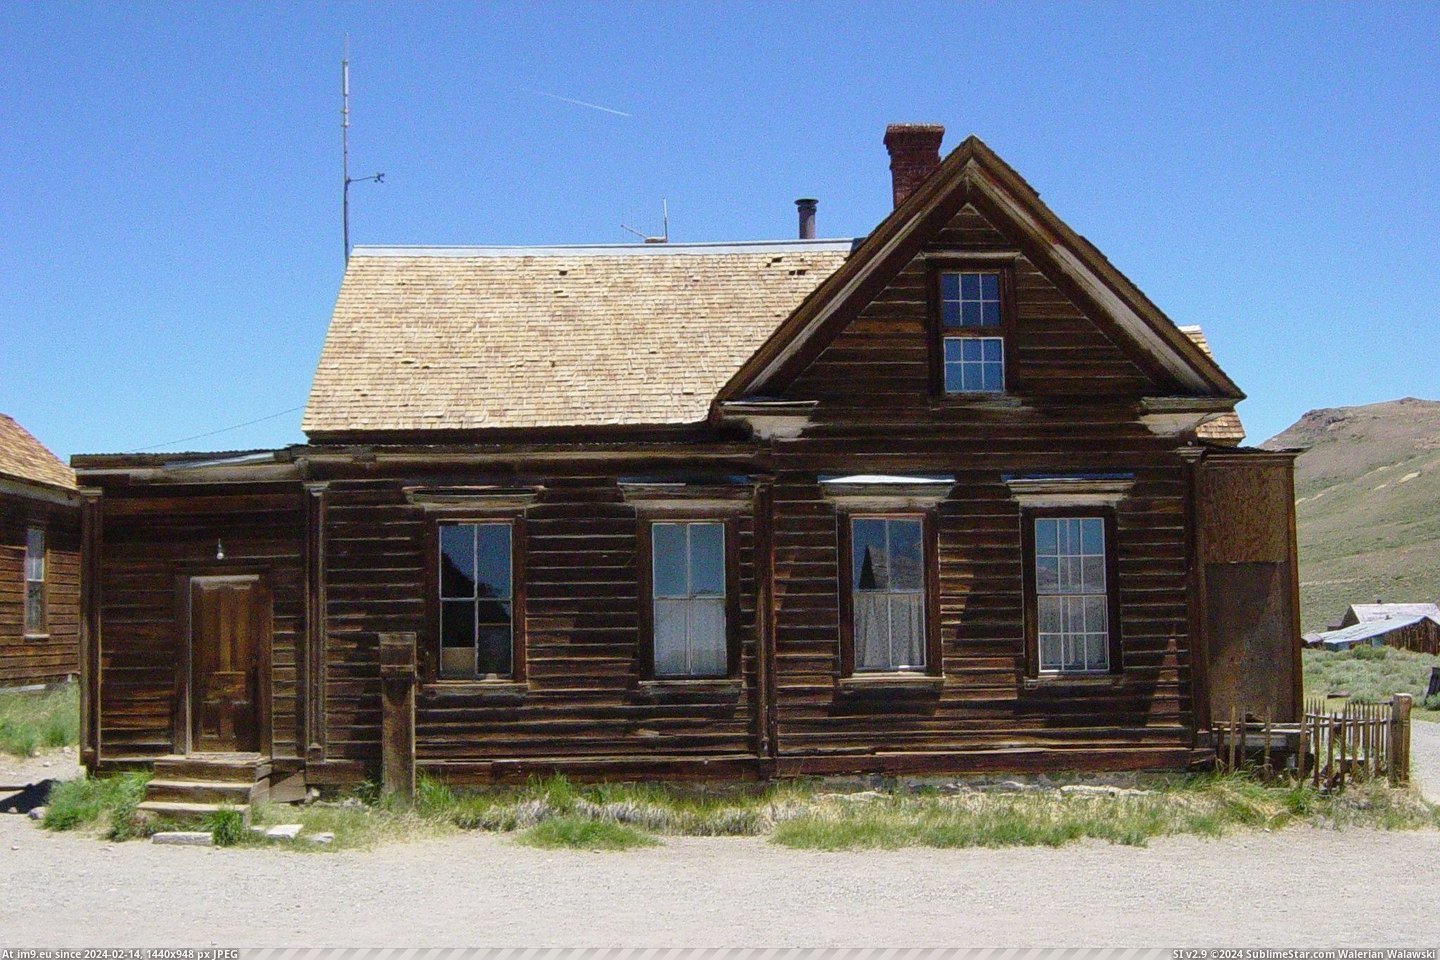 #California #James #Cain #Bodie #Residence James S. Cain Residence In Bodie, California Pic. (Bild von album Bodie - a ghost town in Eastern California))